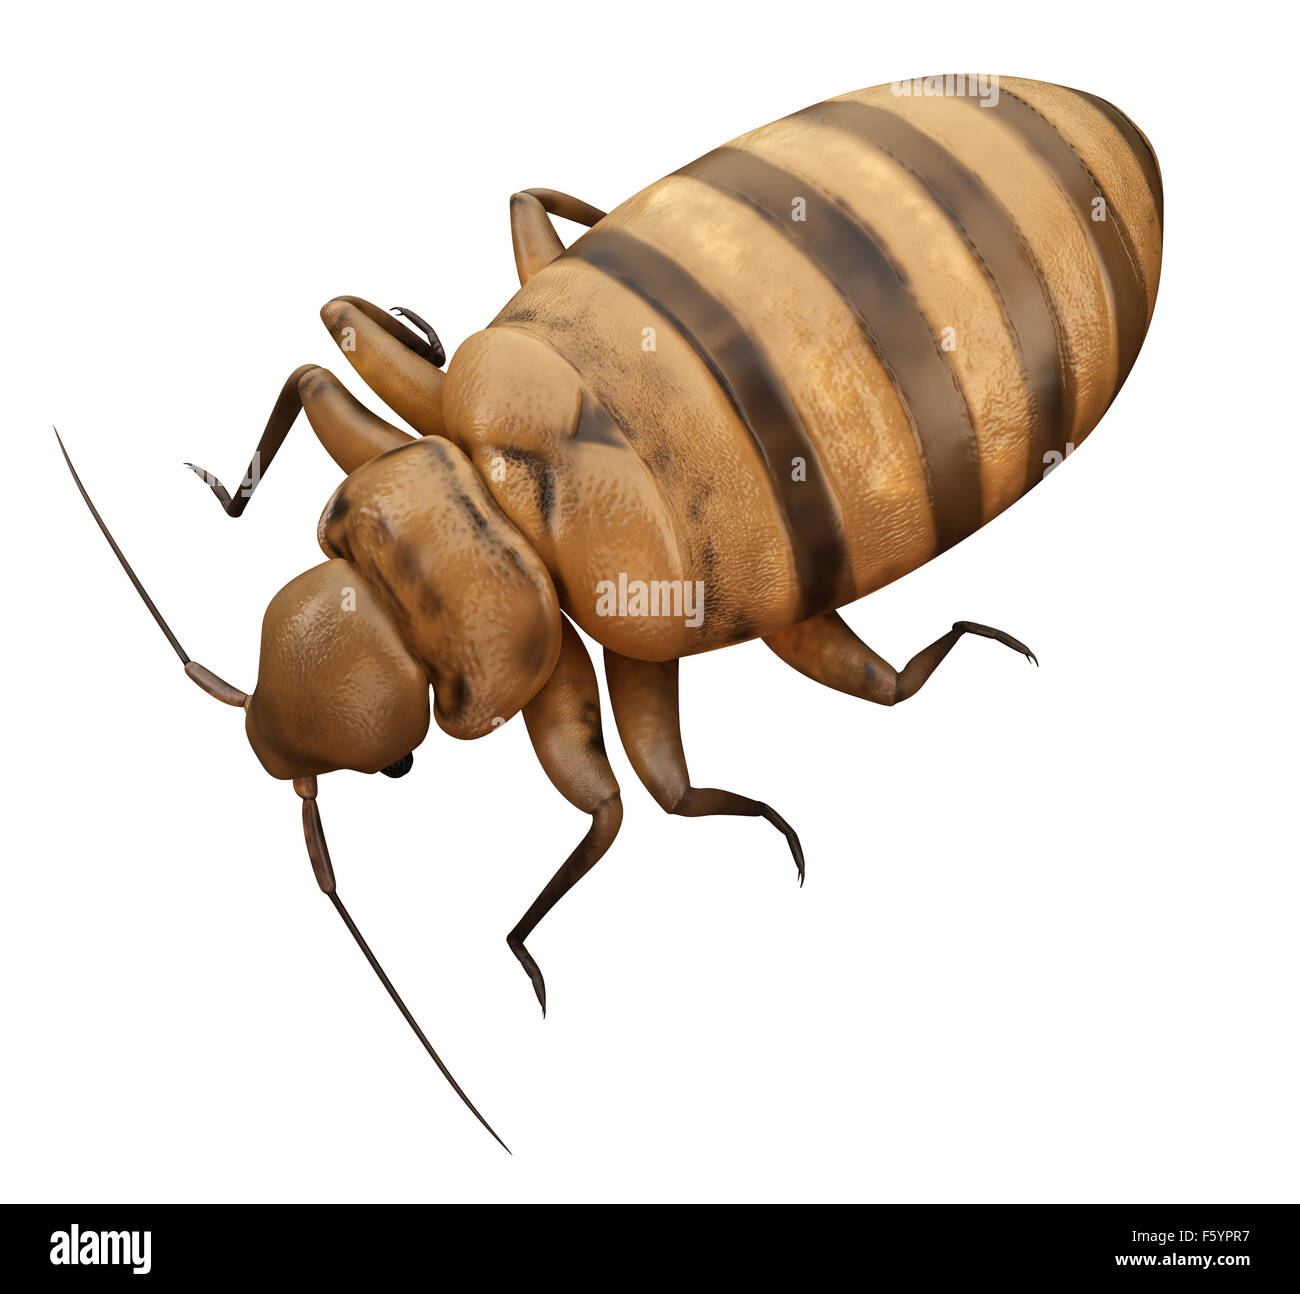 medically accurate illustration of a bed bug Stock Photo